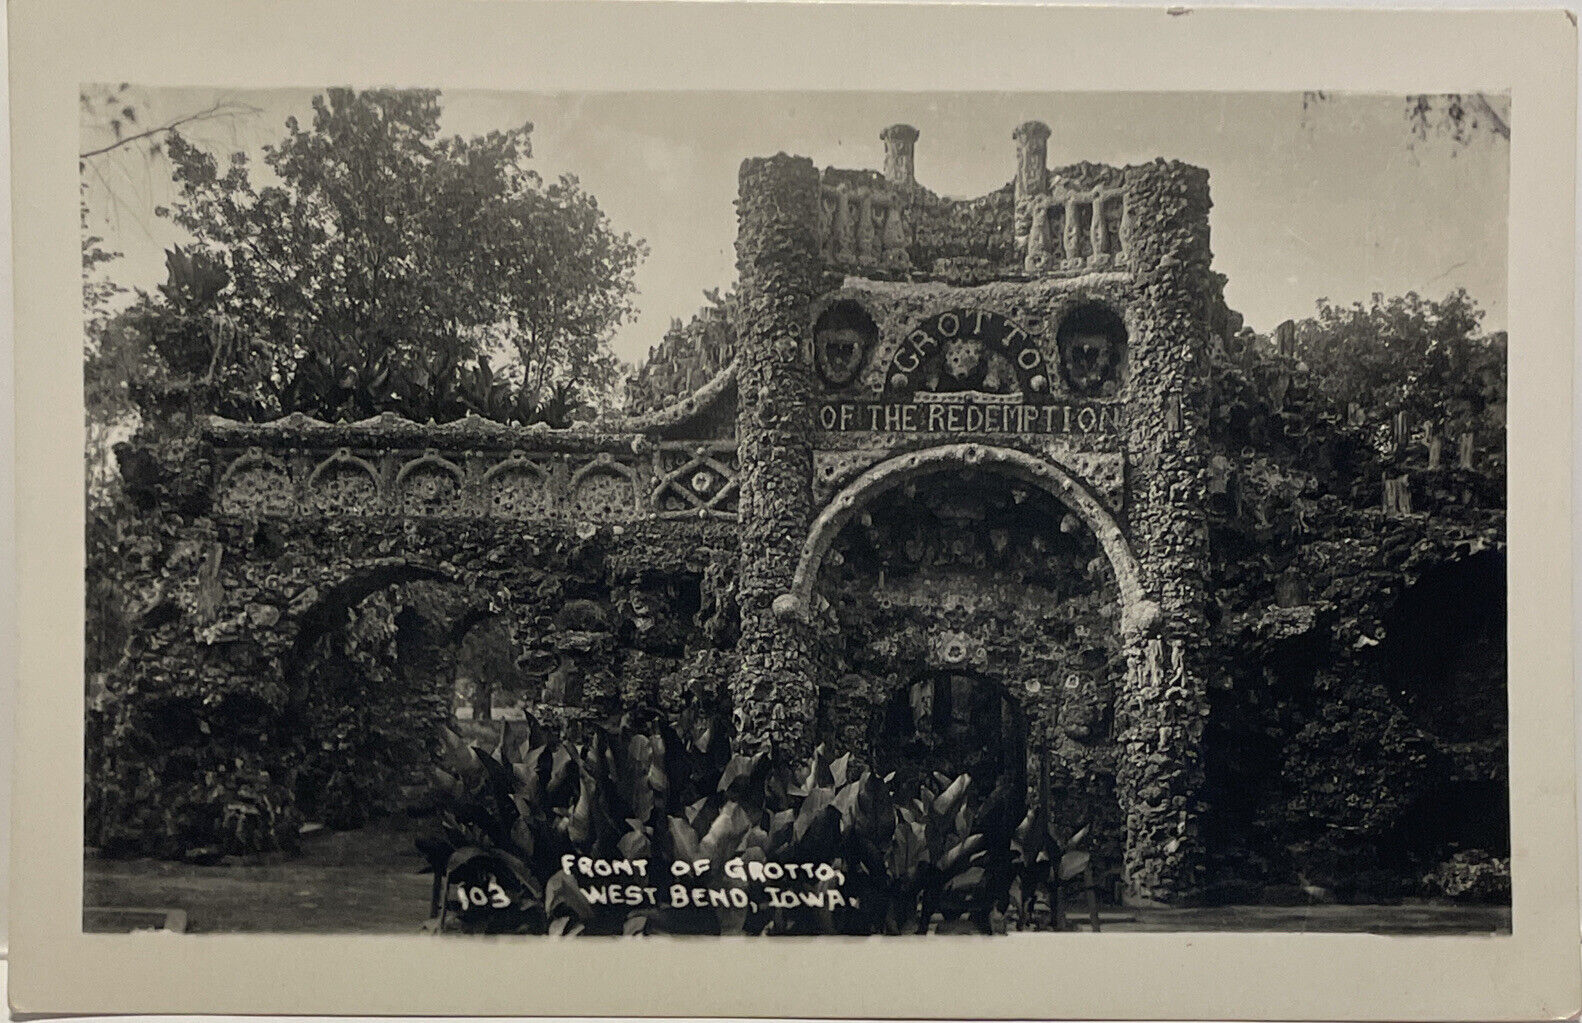 RPPC Front Of Grotto West Bend Iowa Real Photo Postcard Vintage